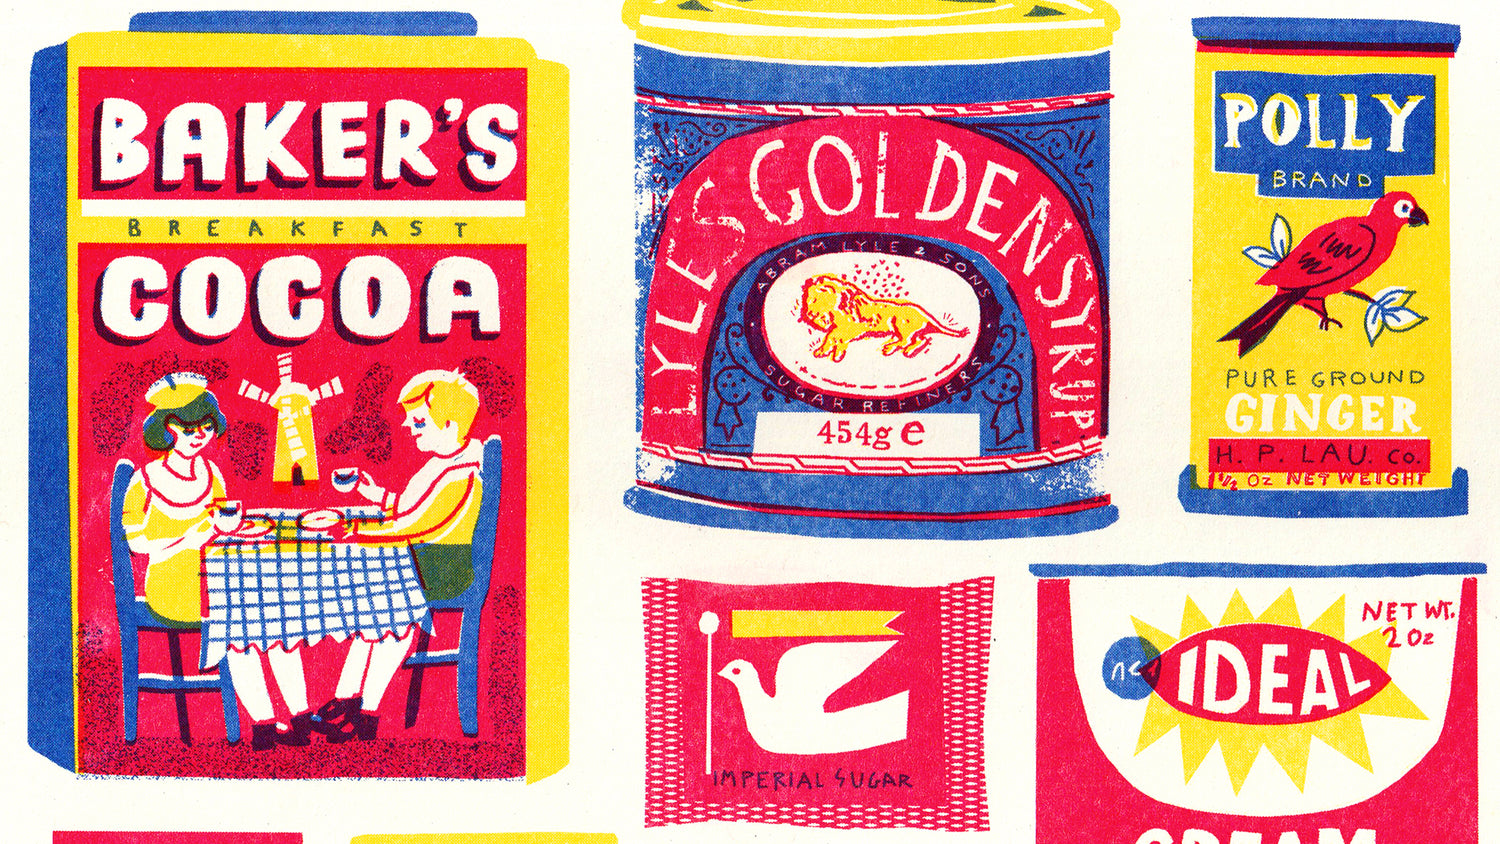 risograph illustration of baking items by louise lockhart